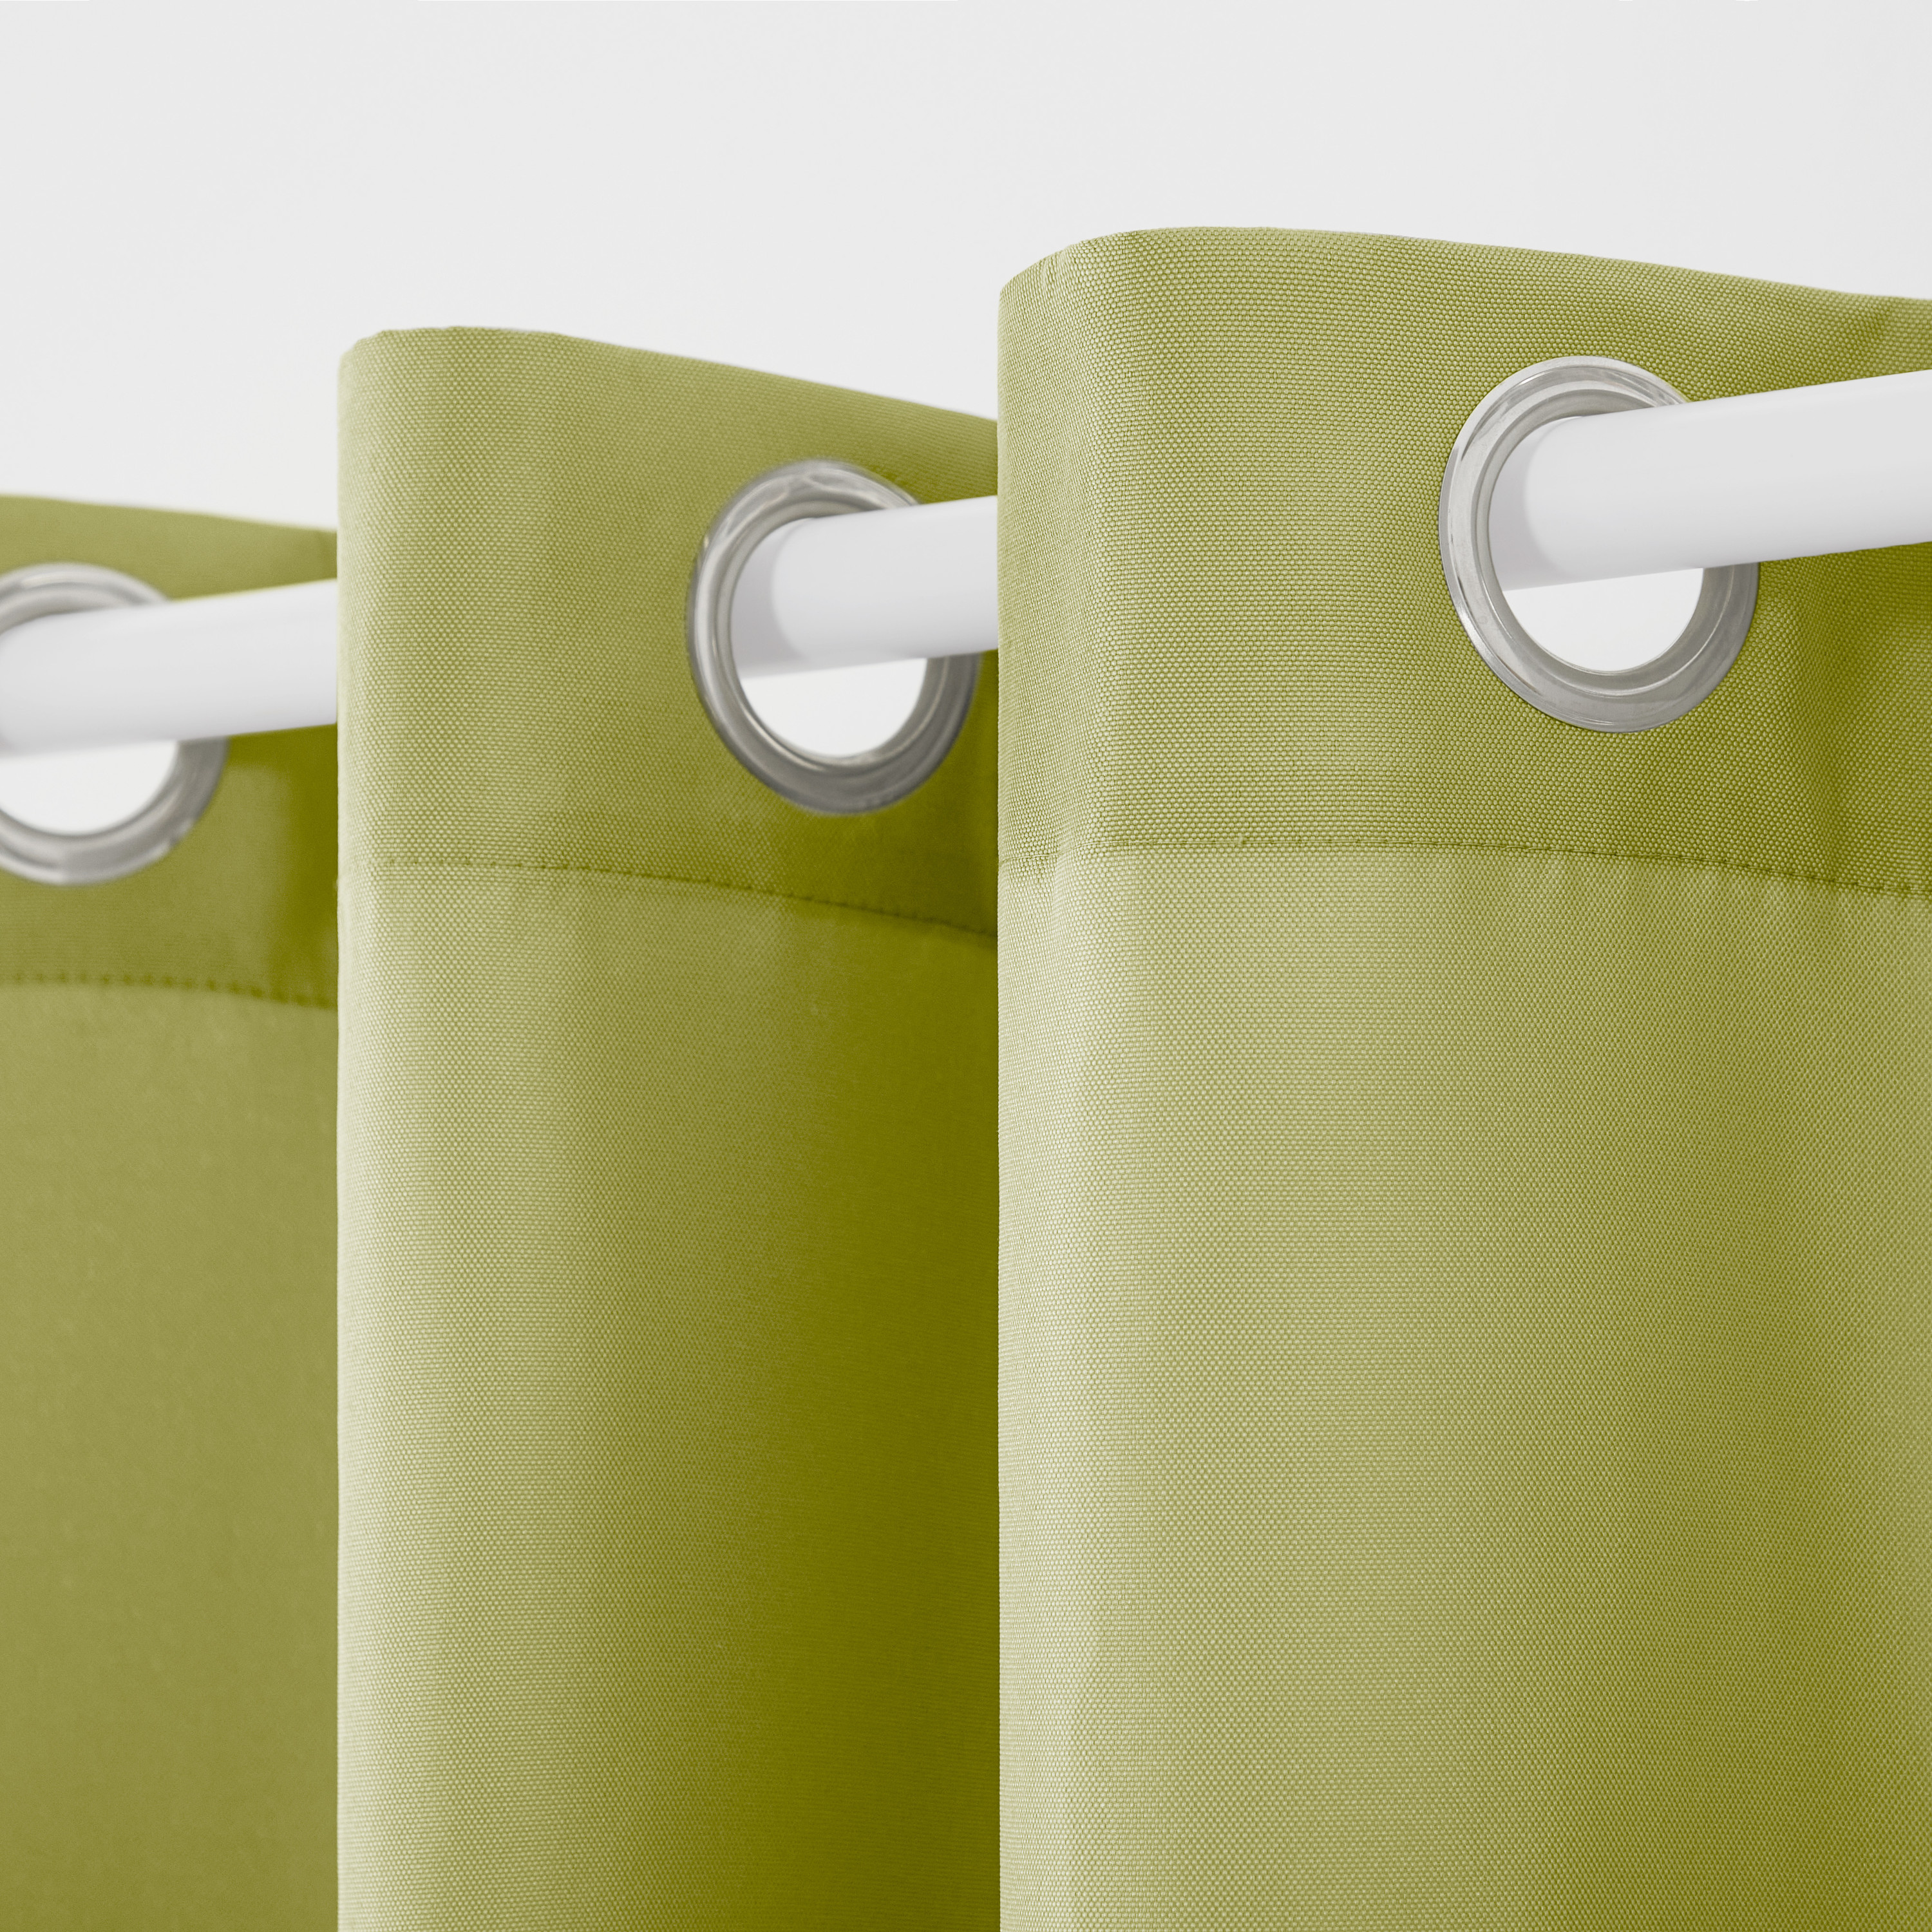 Exclusive Home Curtains Indoor/Outdoor Solid Cabana Grommet Top Curtain Panel Pair, 54x84, Kiwi Green - image 3 of 10